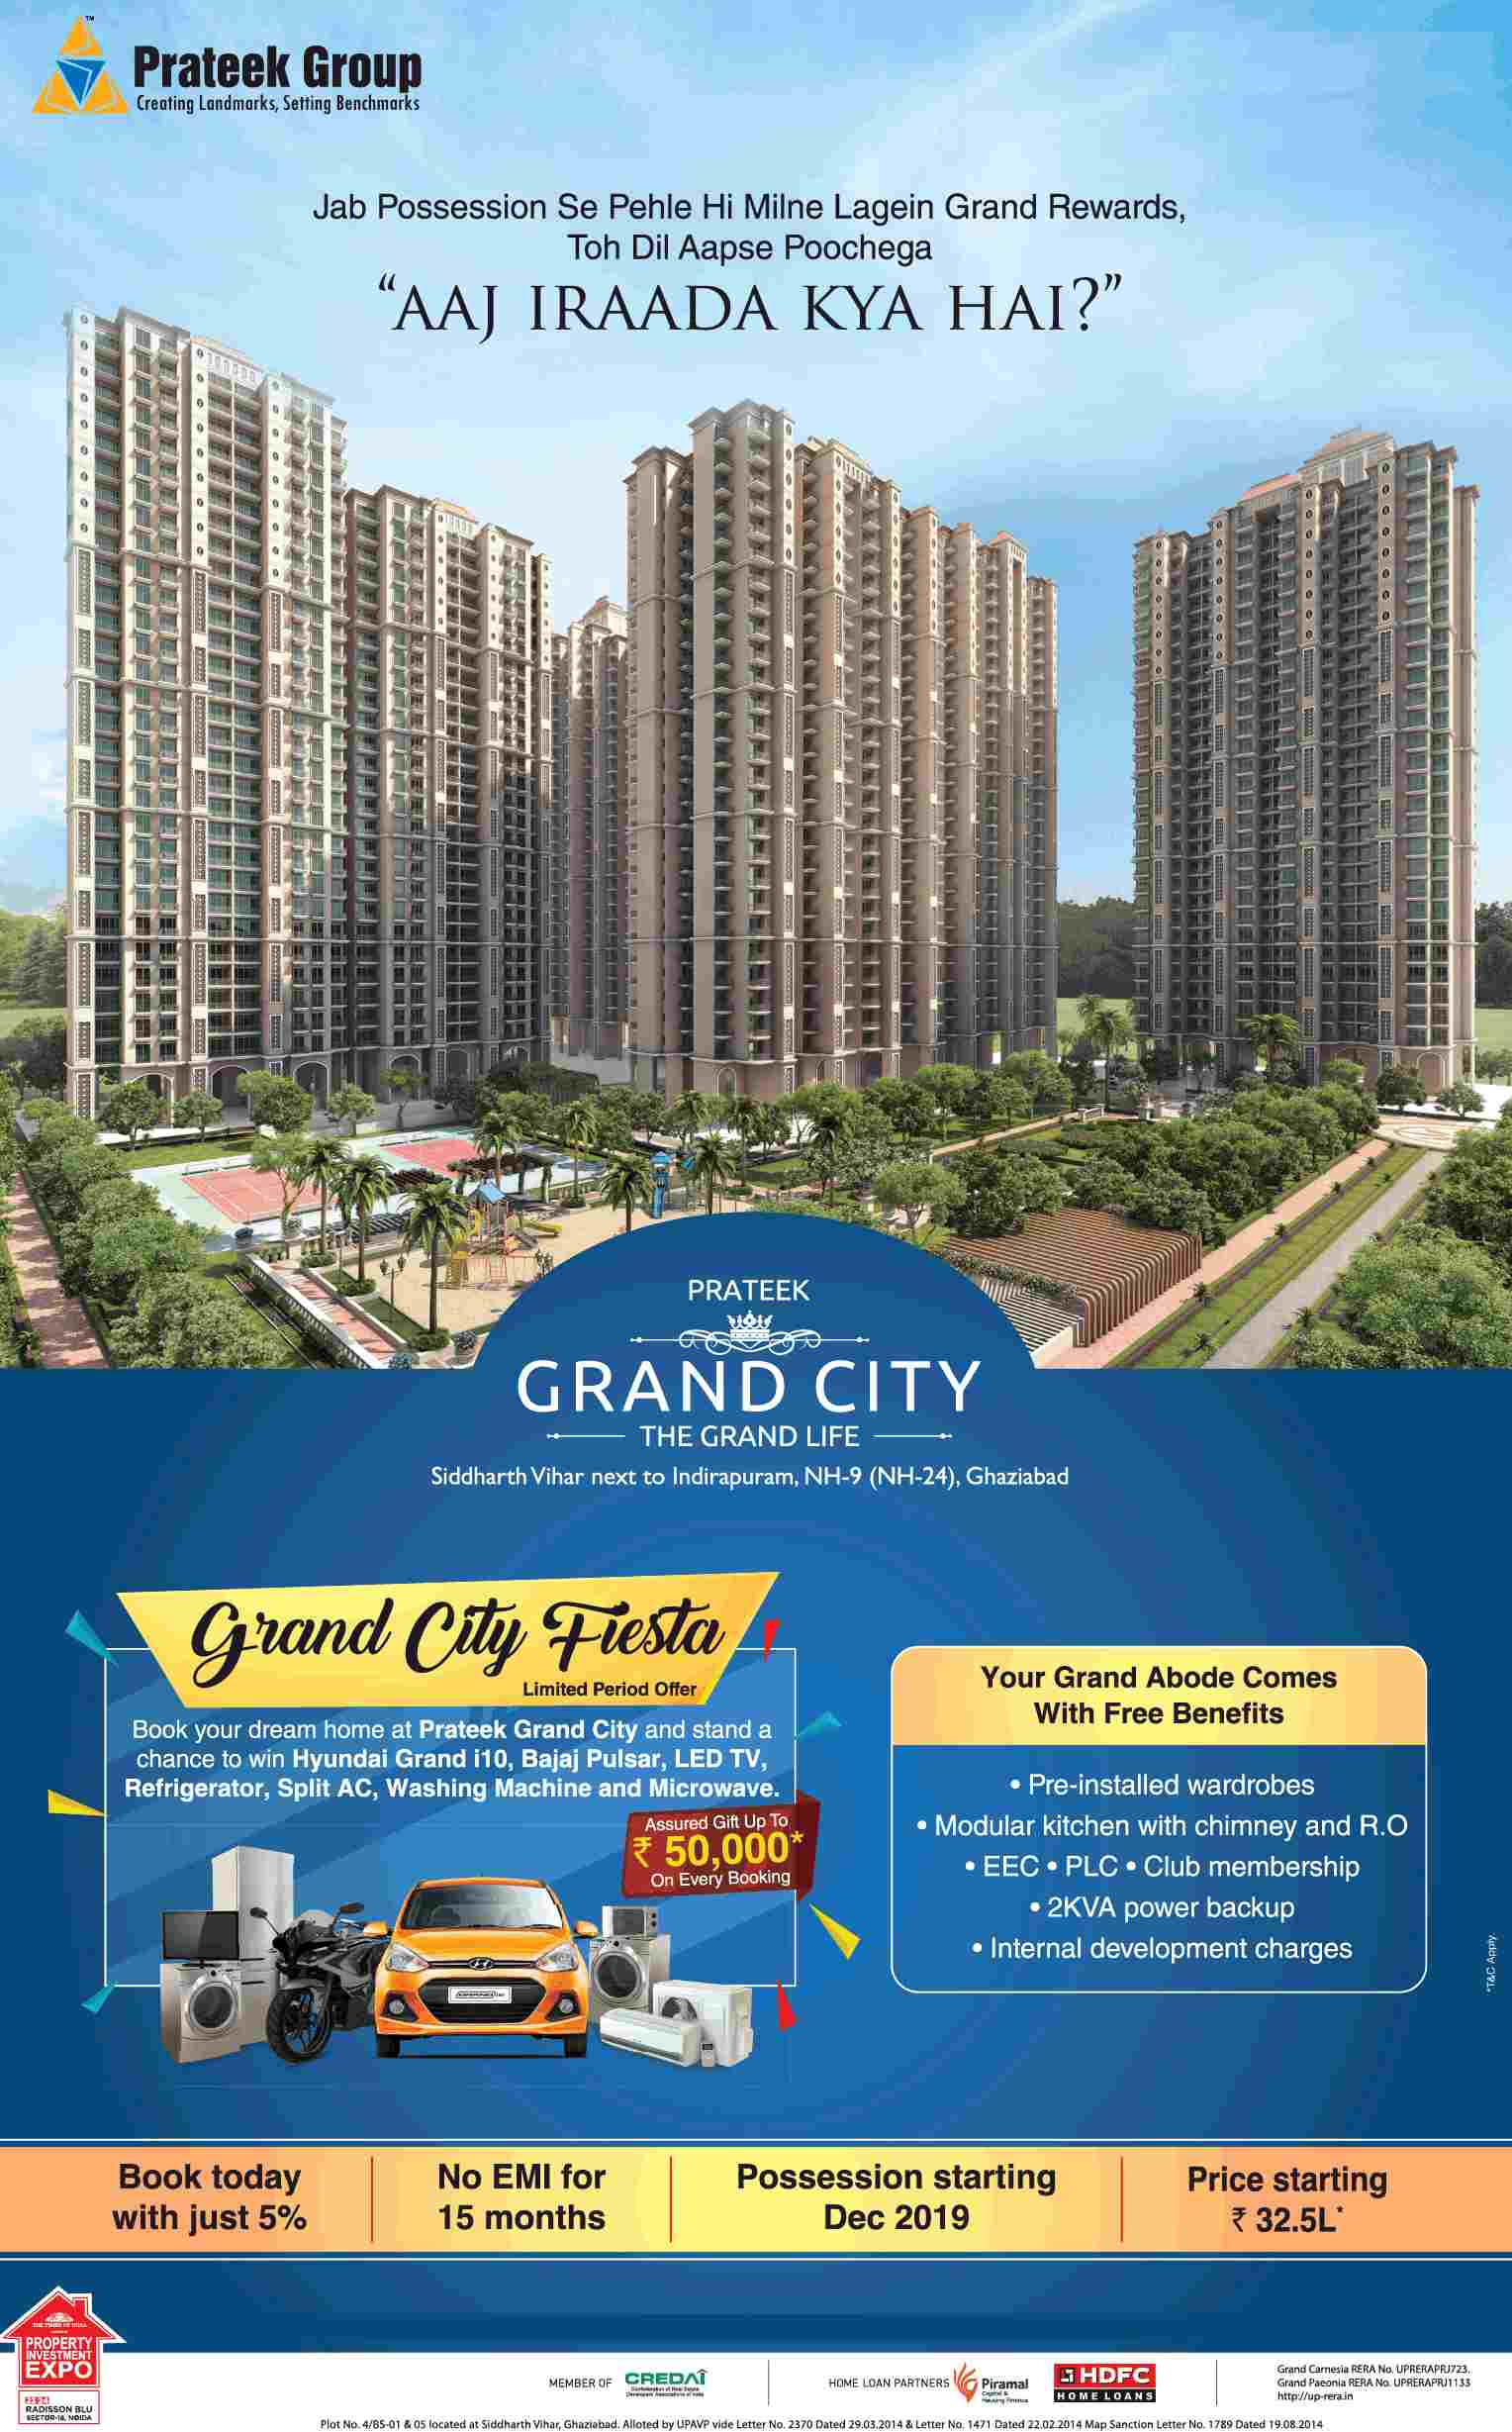 Get assured gift up to Rs 50000 on booking home at Prateek Grand City in Siddharth Vihar, Ghaziabad Update